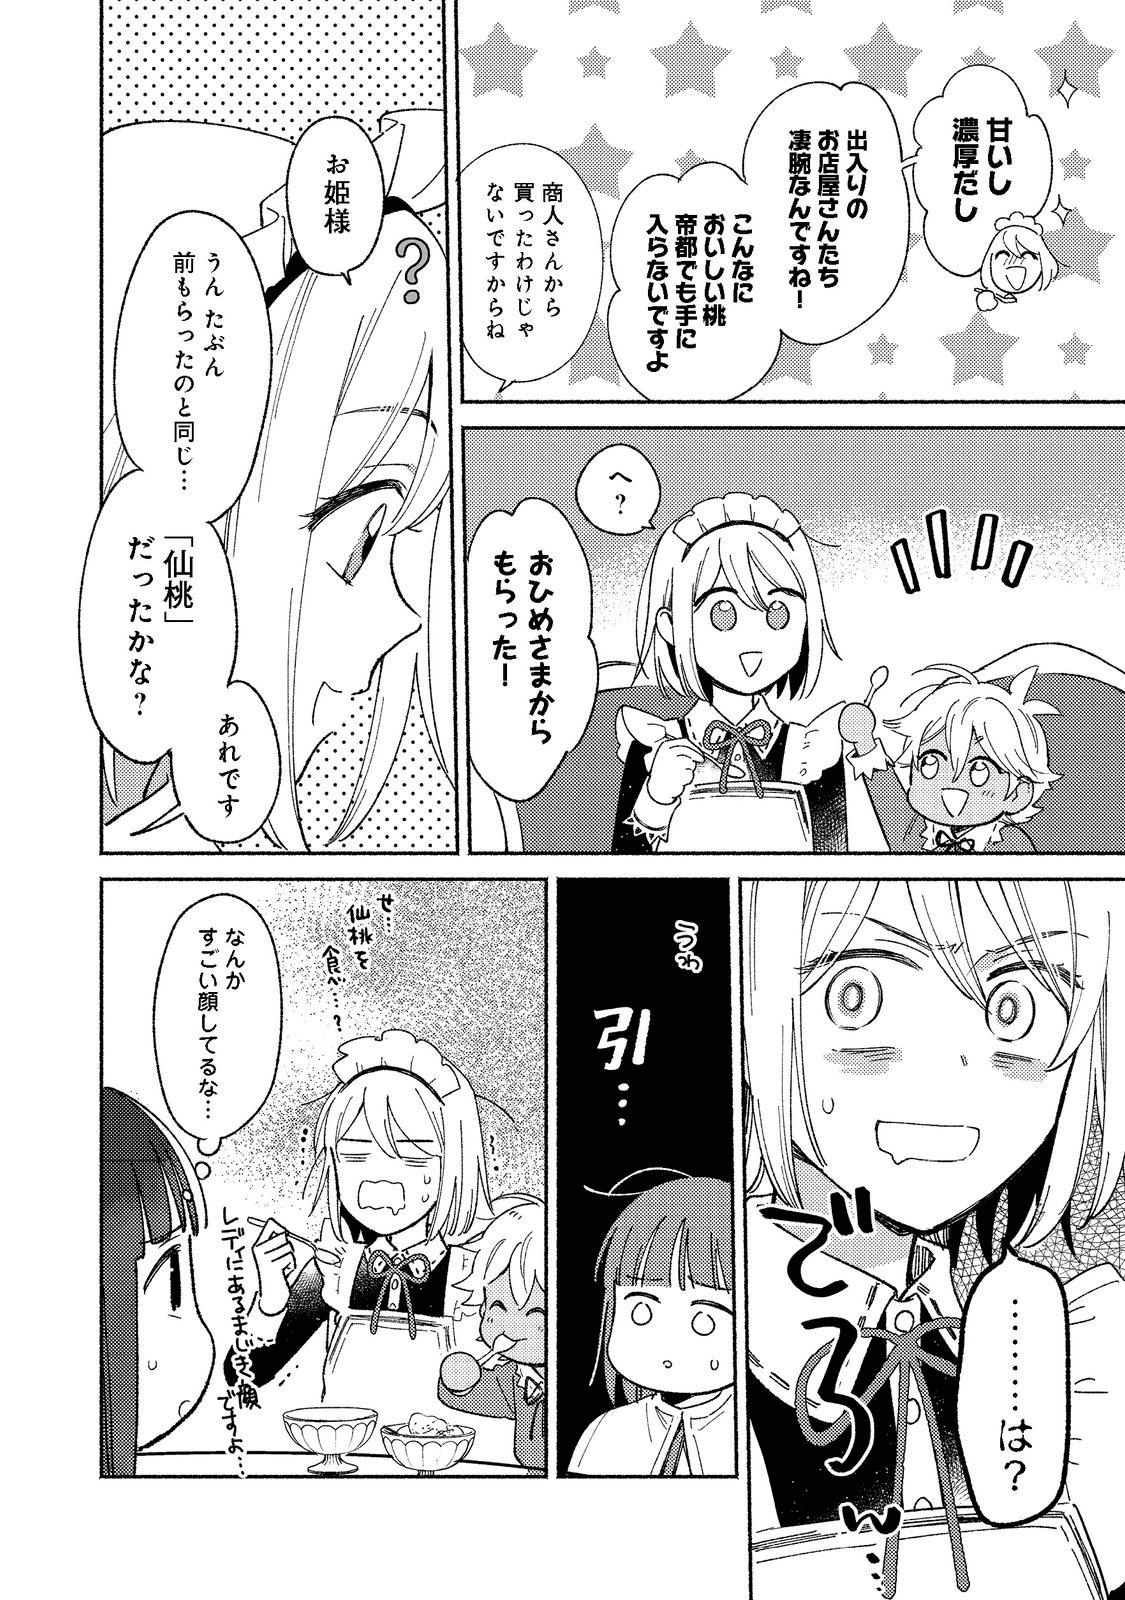 I’m the White Pig Nobleman 第14.2話 - Page 2